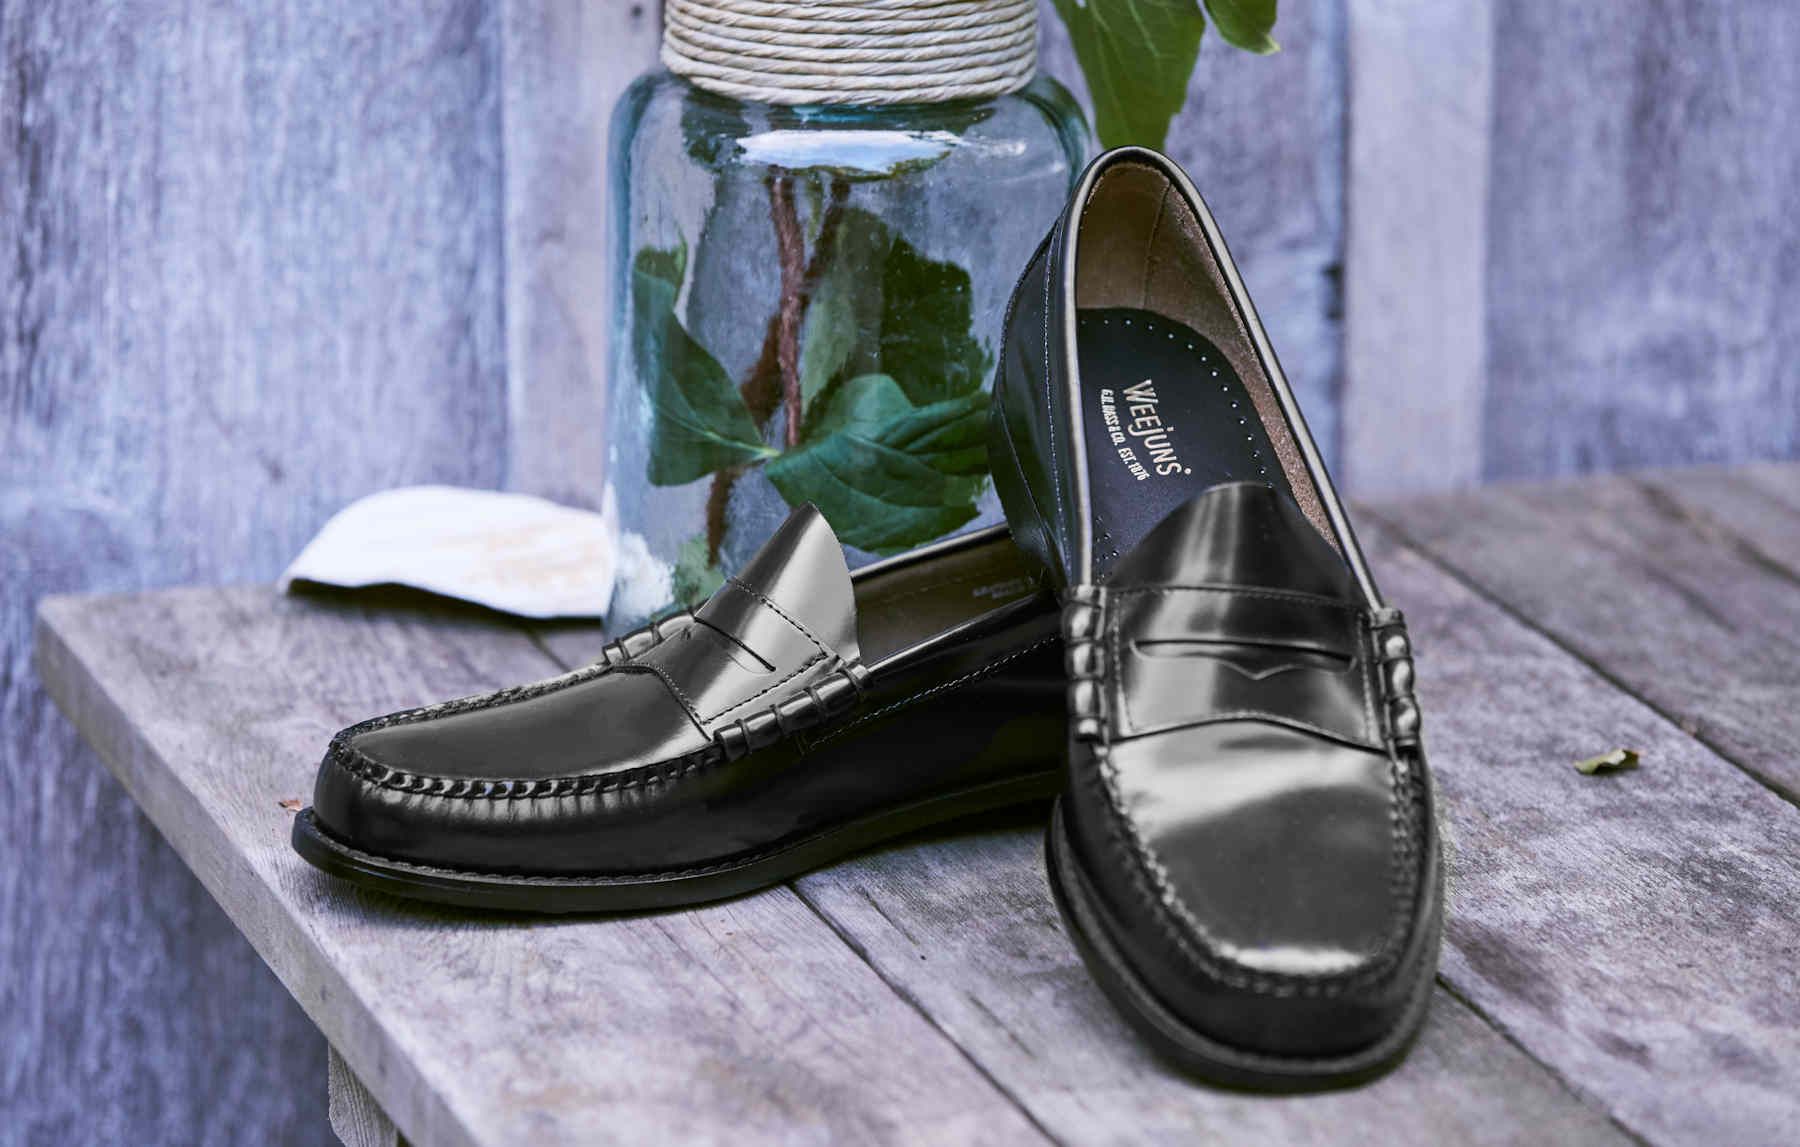 weejuns mens loafers